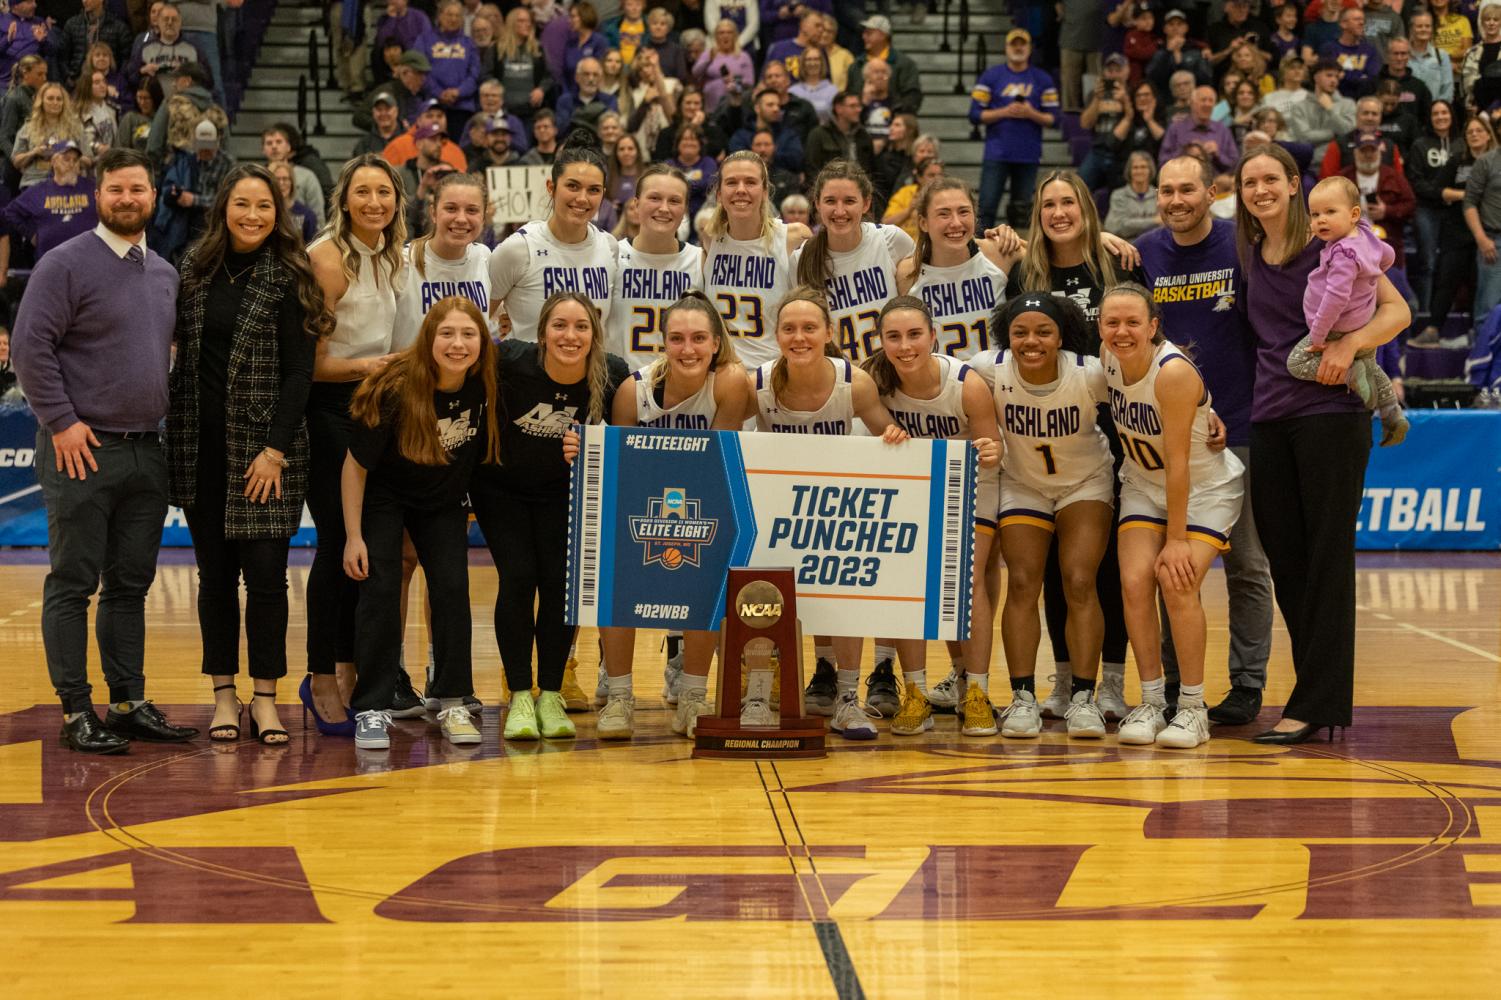 Vikings Tie For Super Regional Victory To Punch Ticket to NCAA National  Championships - Western Washington University Athletics